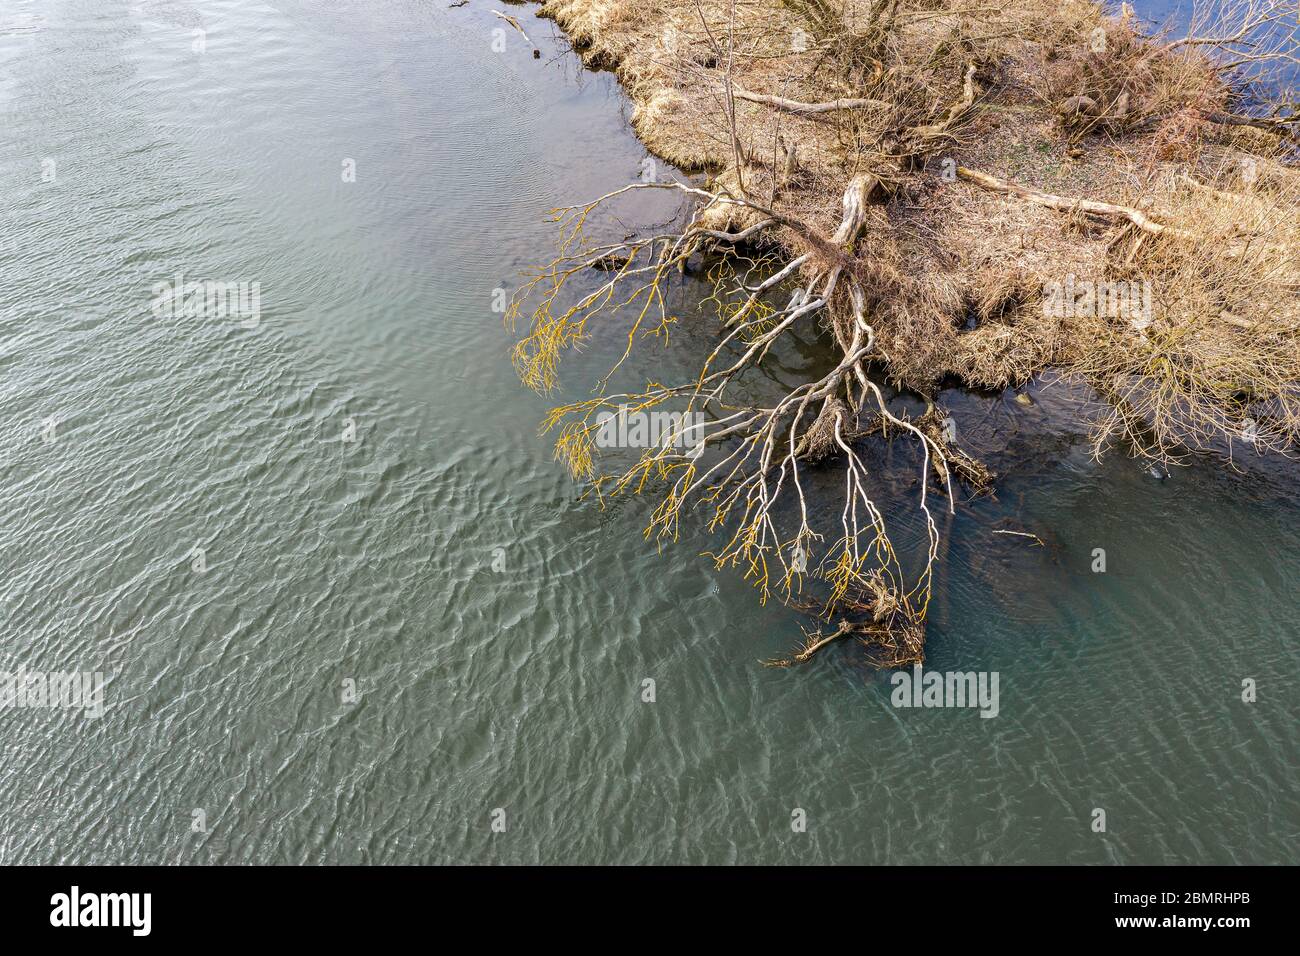 grassy shore of a small island on a river. dried tree was inclined over water. drone photo Stock Photo